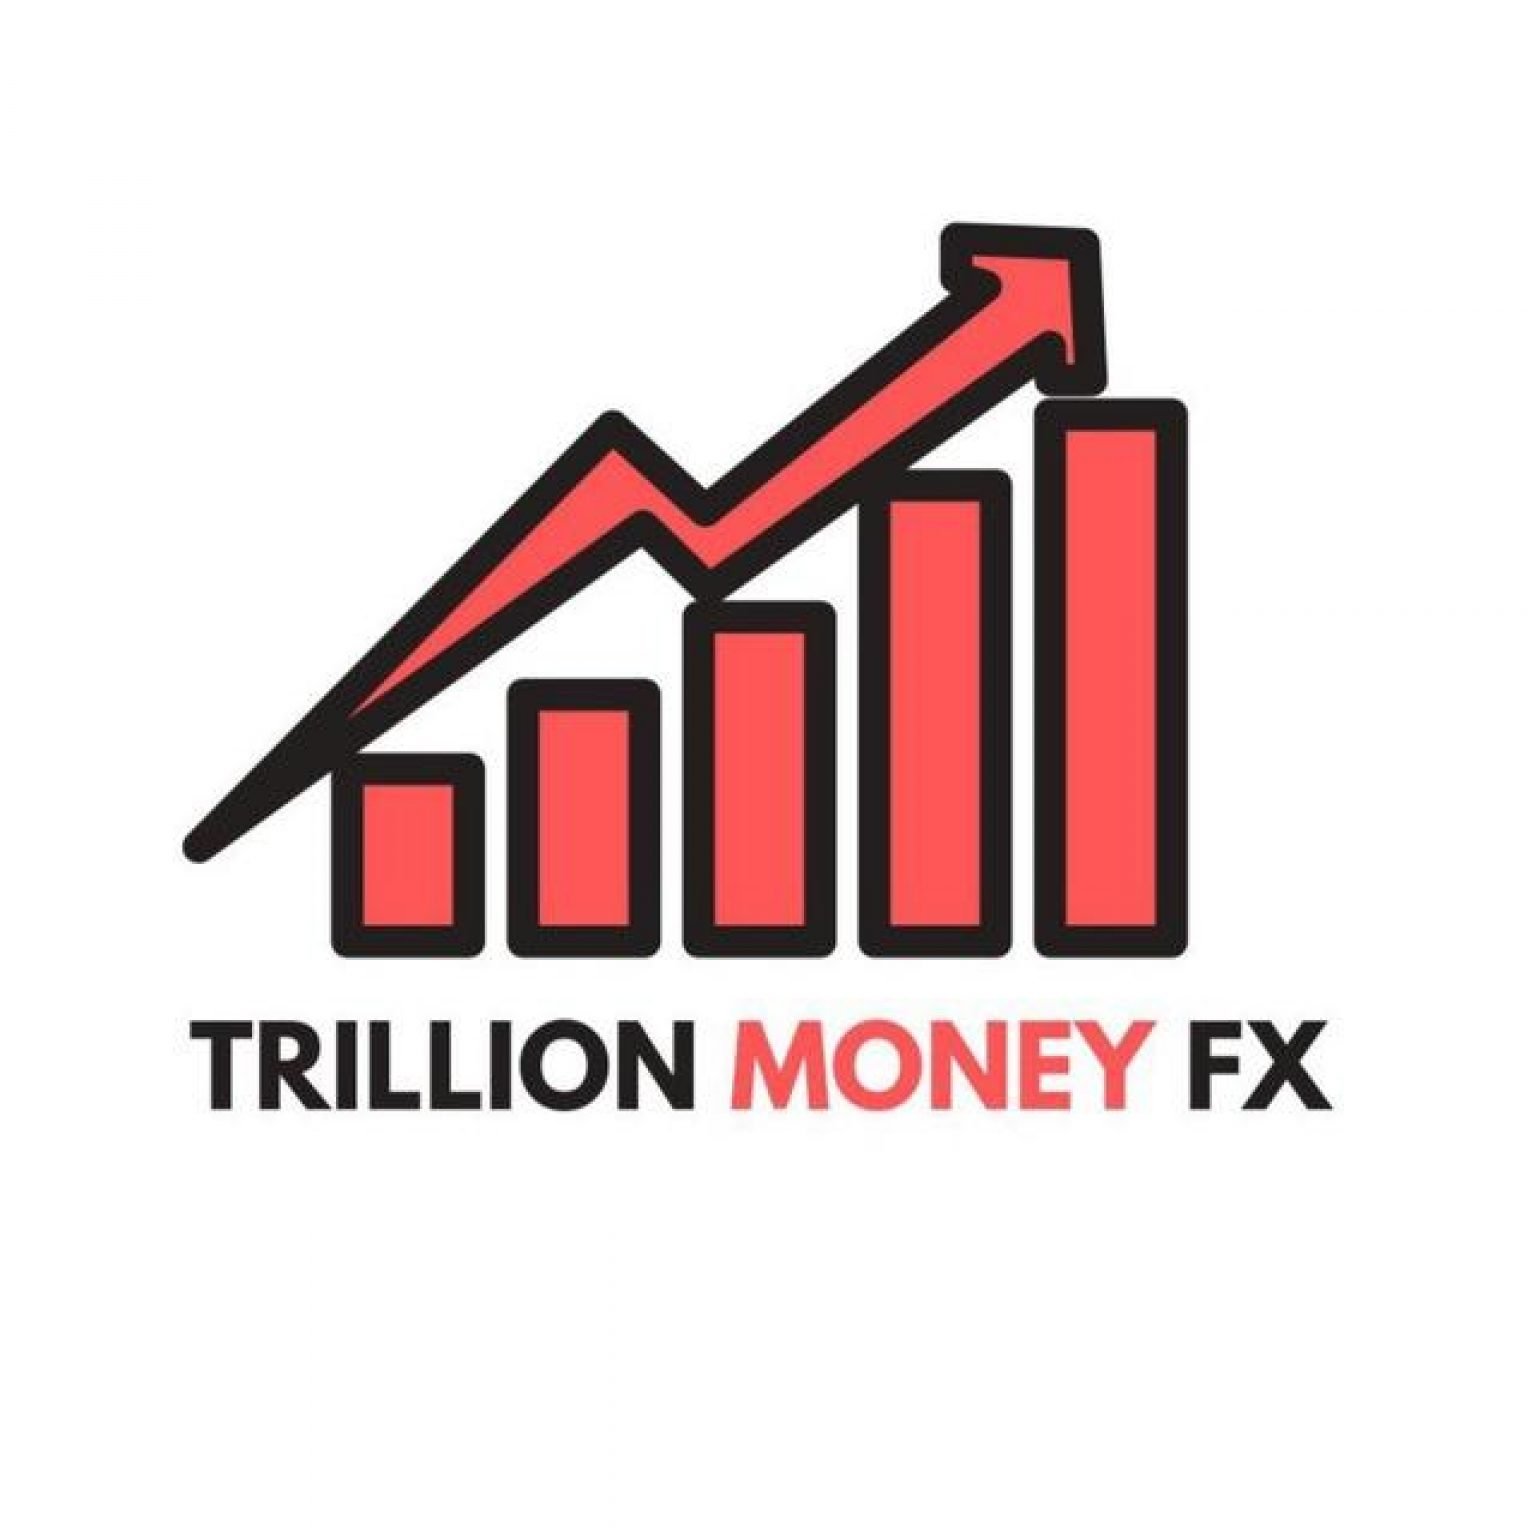 Trusted Forex Reviews » Trillion Money FX-Signals Review ...